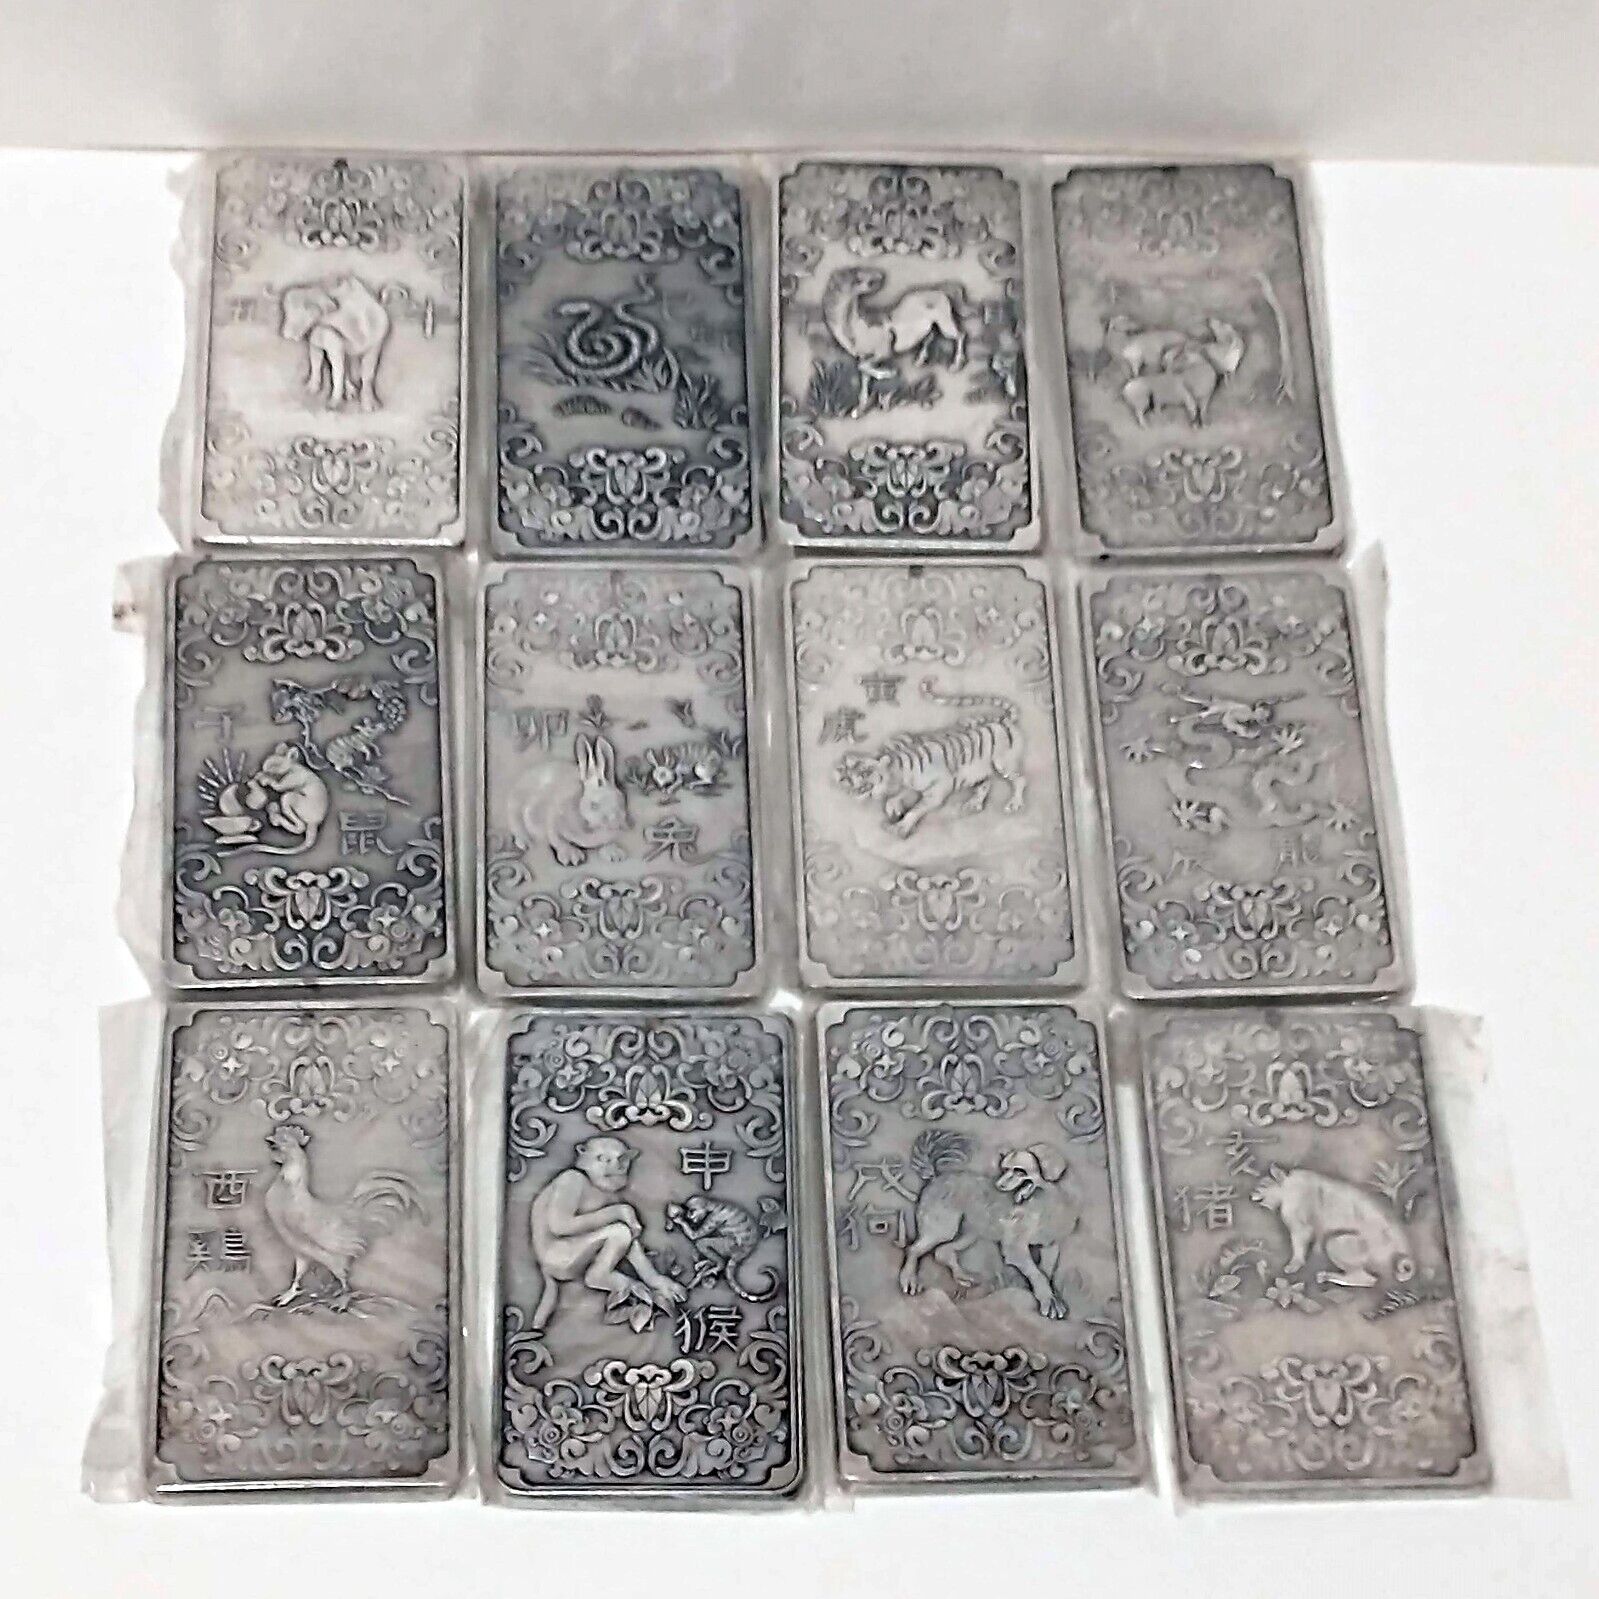 CHINESE ZODIAC ANIMALS COMPLETE SET OF 12 Pendants/Plaques - New - US Seller